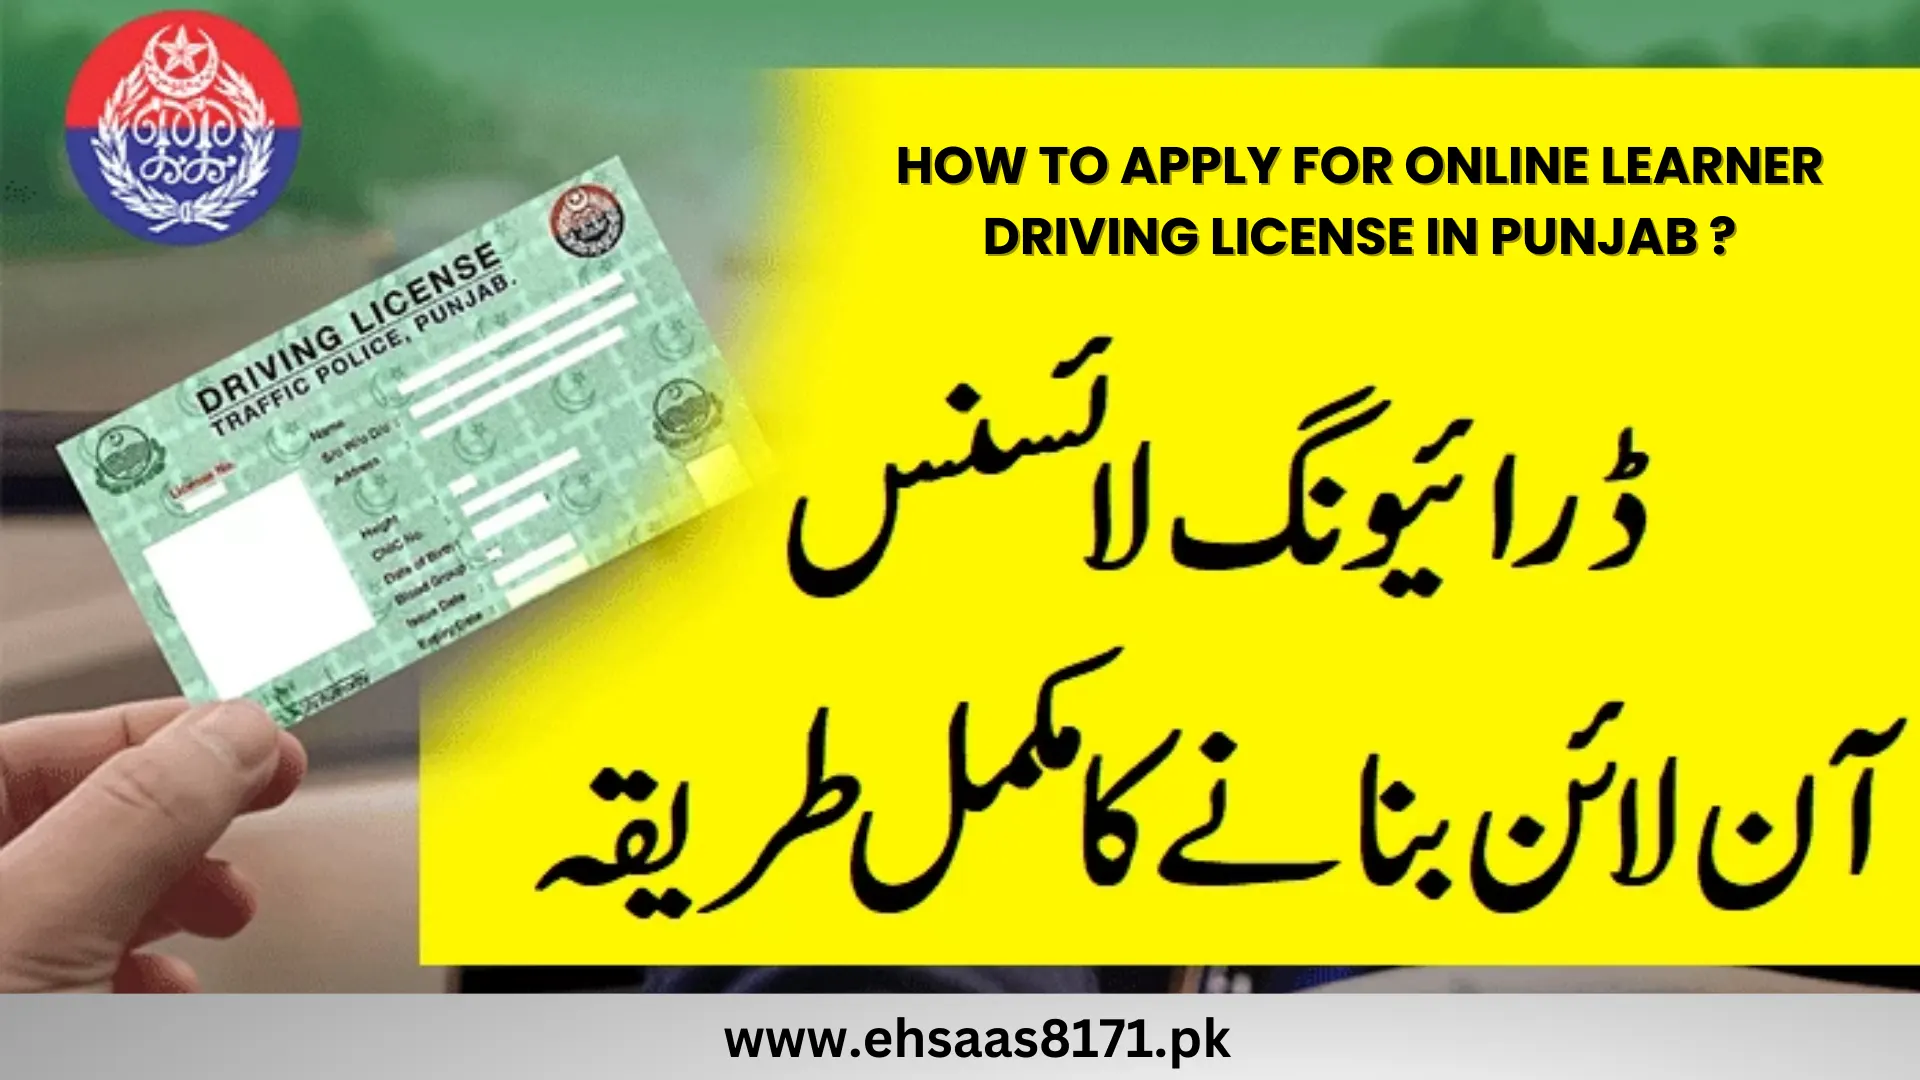 How To Apply for Online Learner Driving License in Punjab